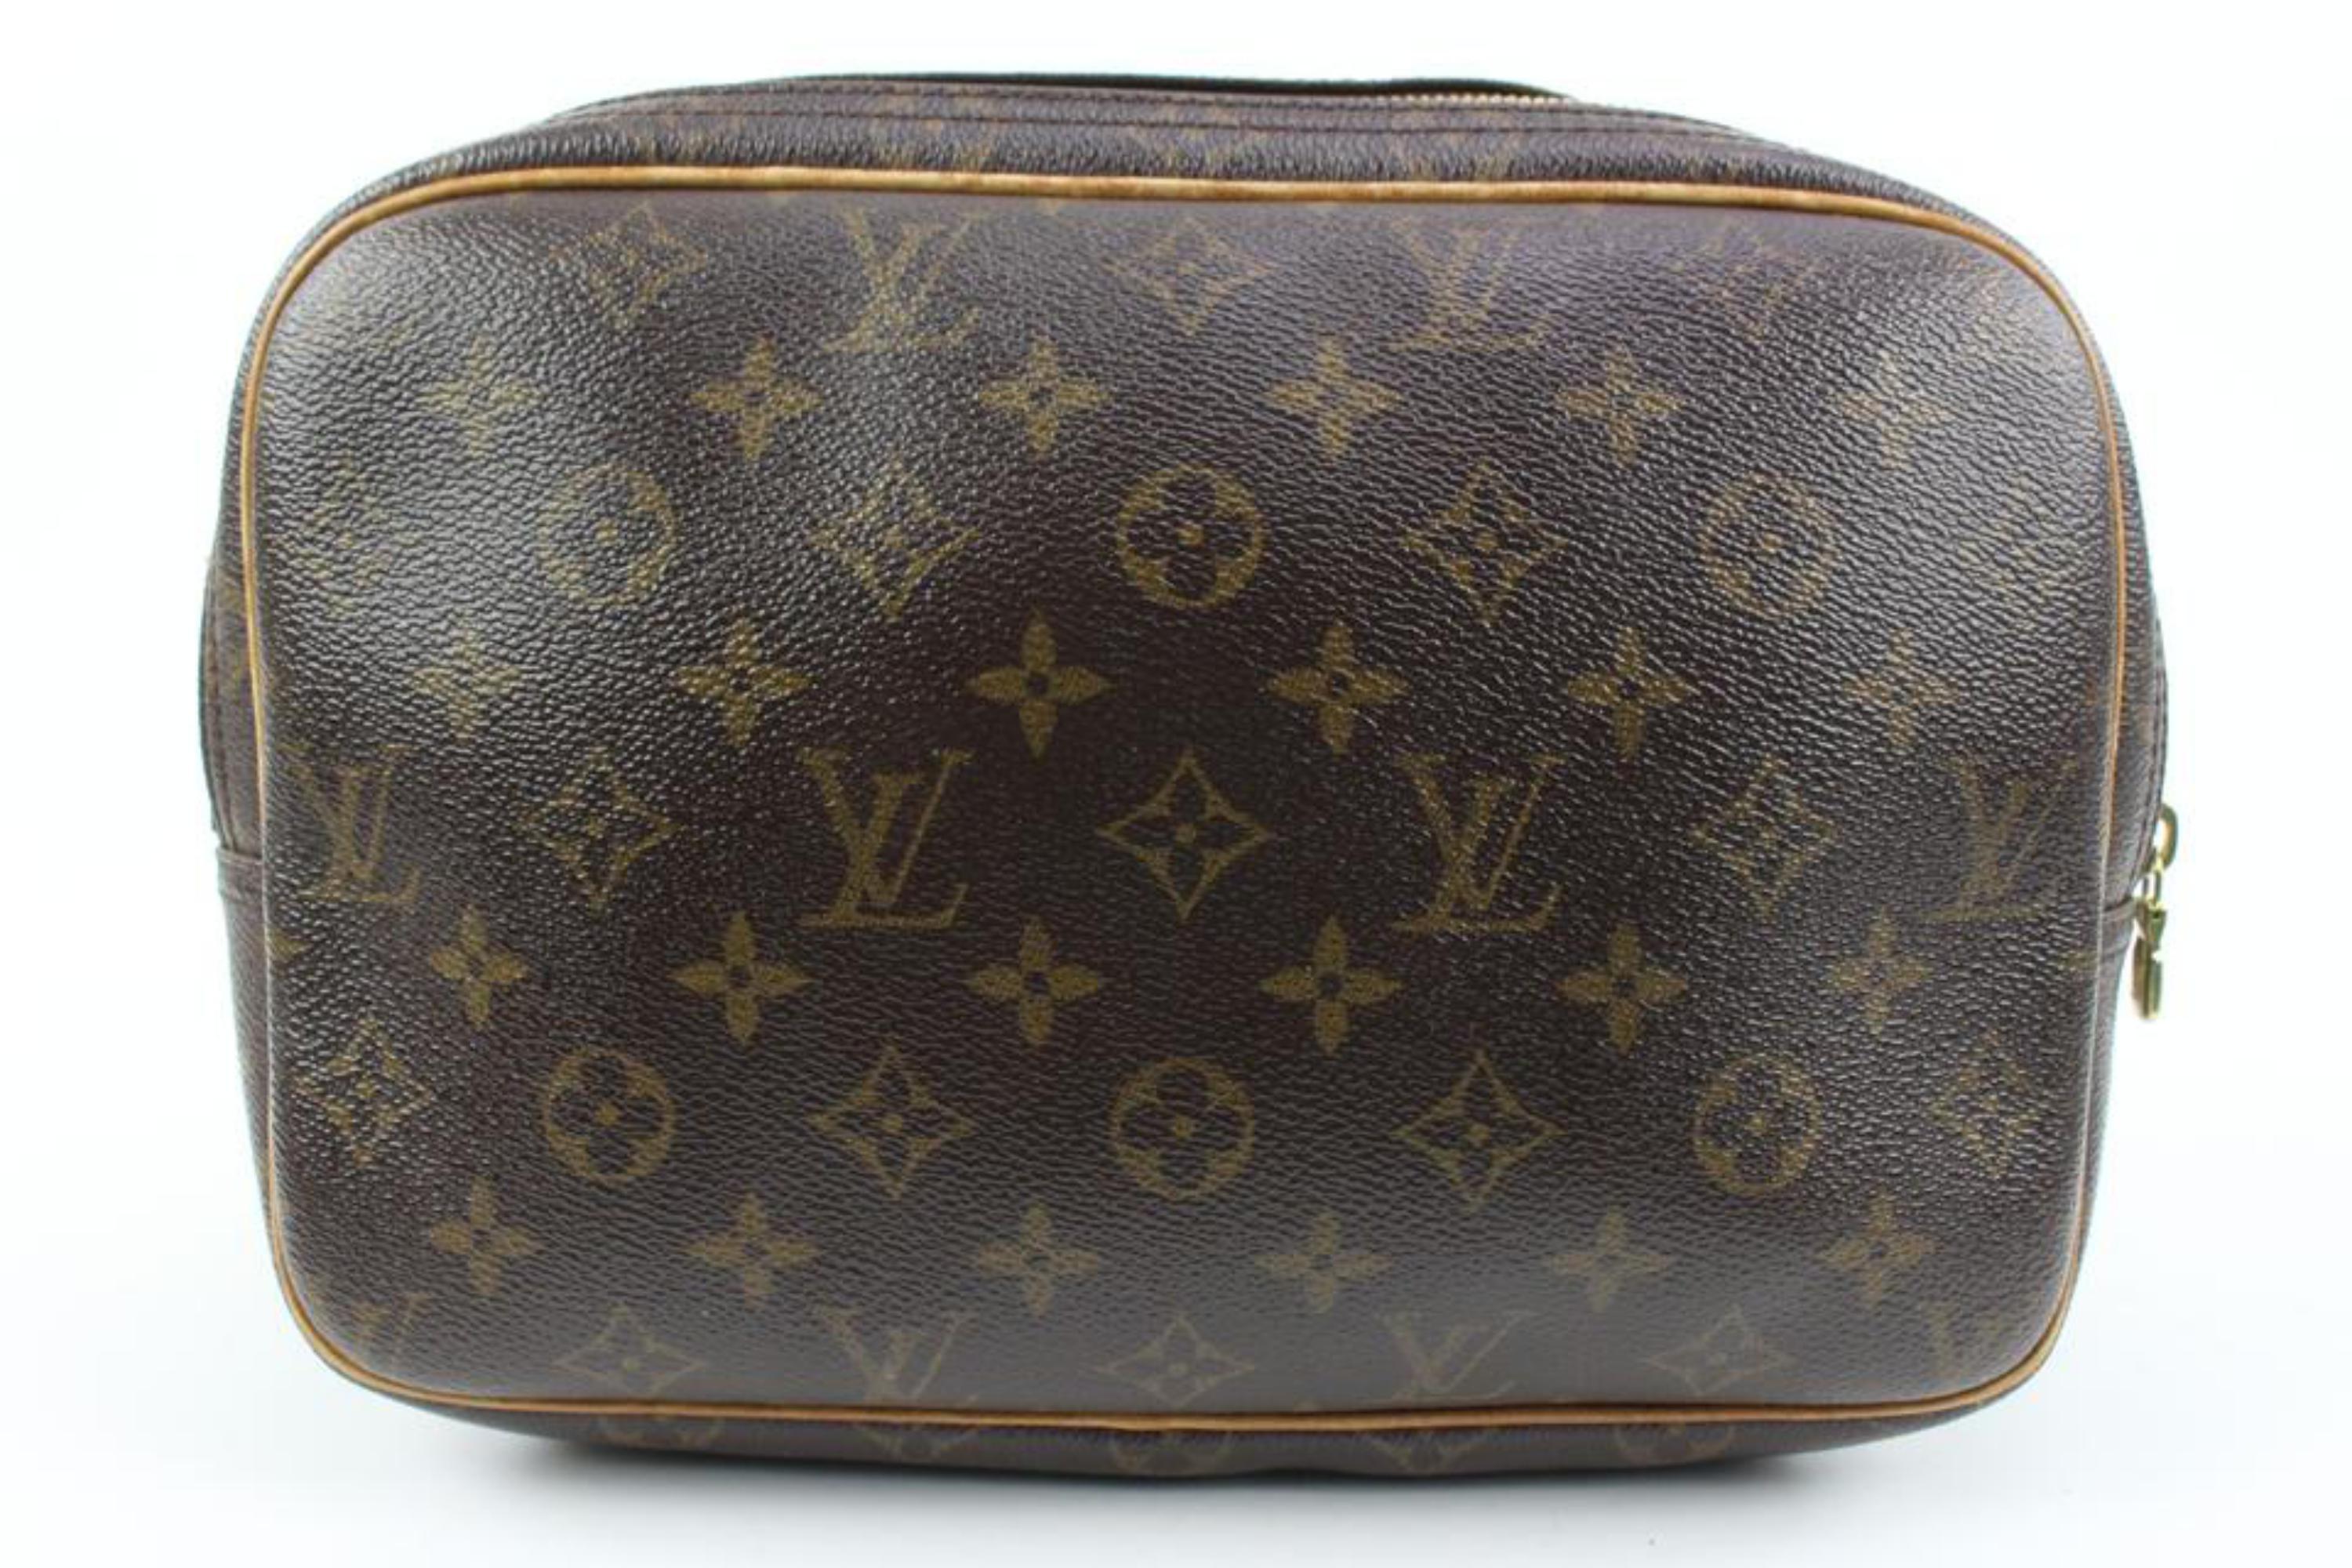 Louis Vuitton Discontinued Monogram Reporter PM Crossbody Bag s29lv25 In Good Condition For Sale In Dix hills, NY